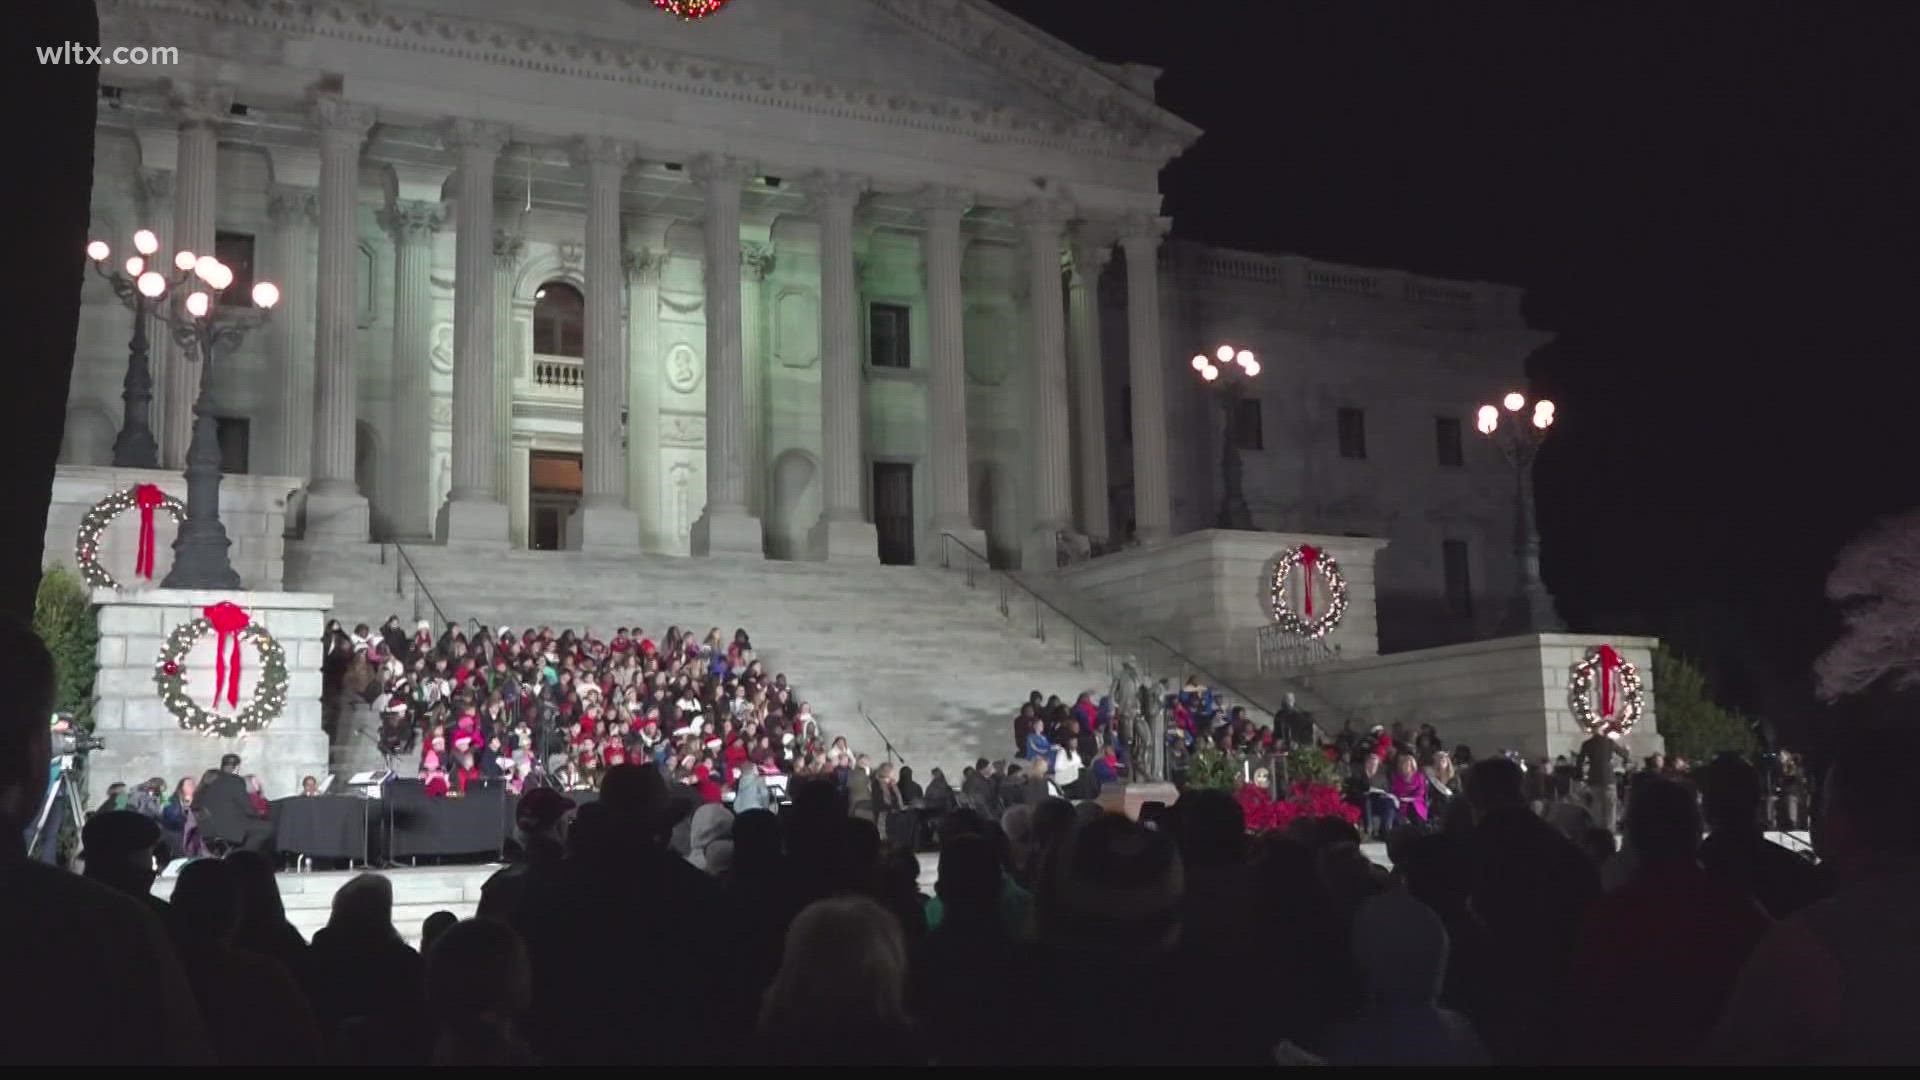 The sights and sounds of the annual event featured school choirs and the lighting of the State Christmas Tree